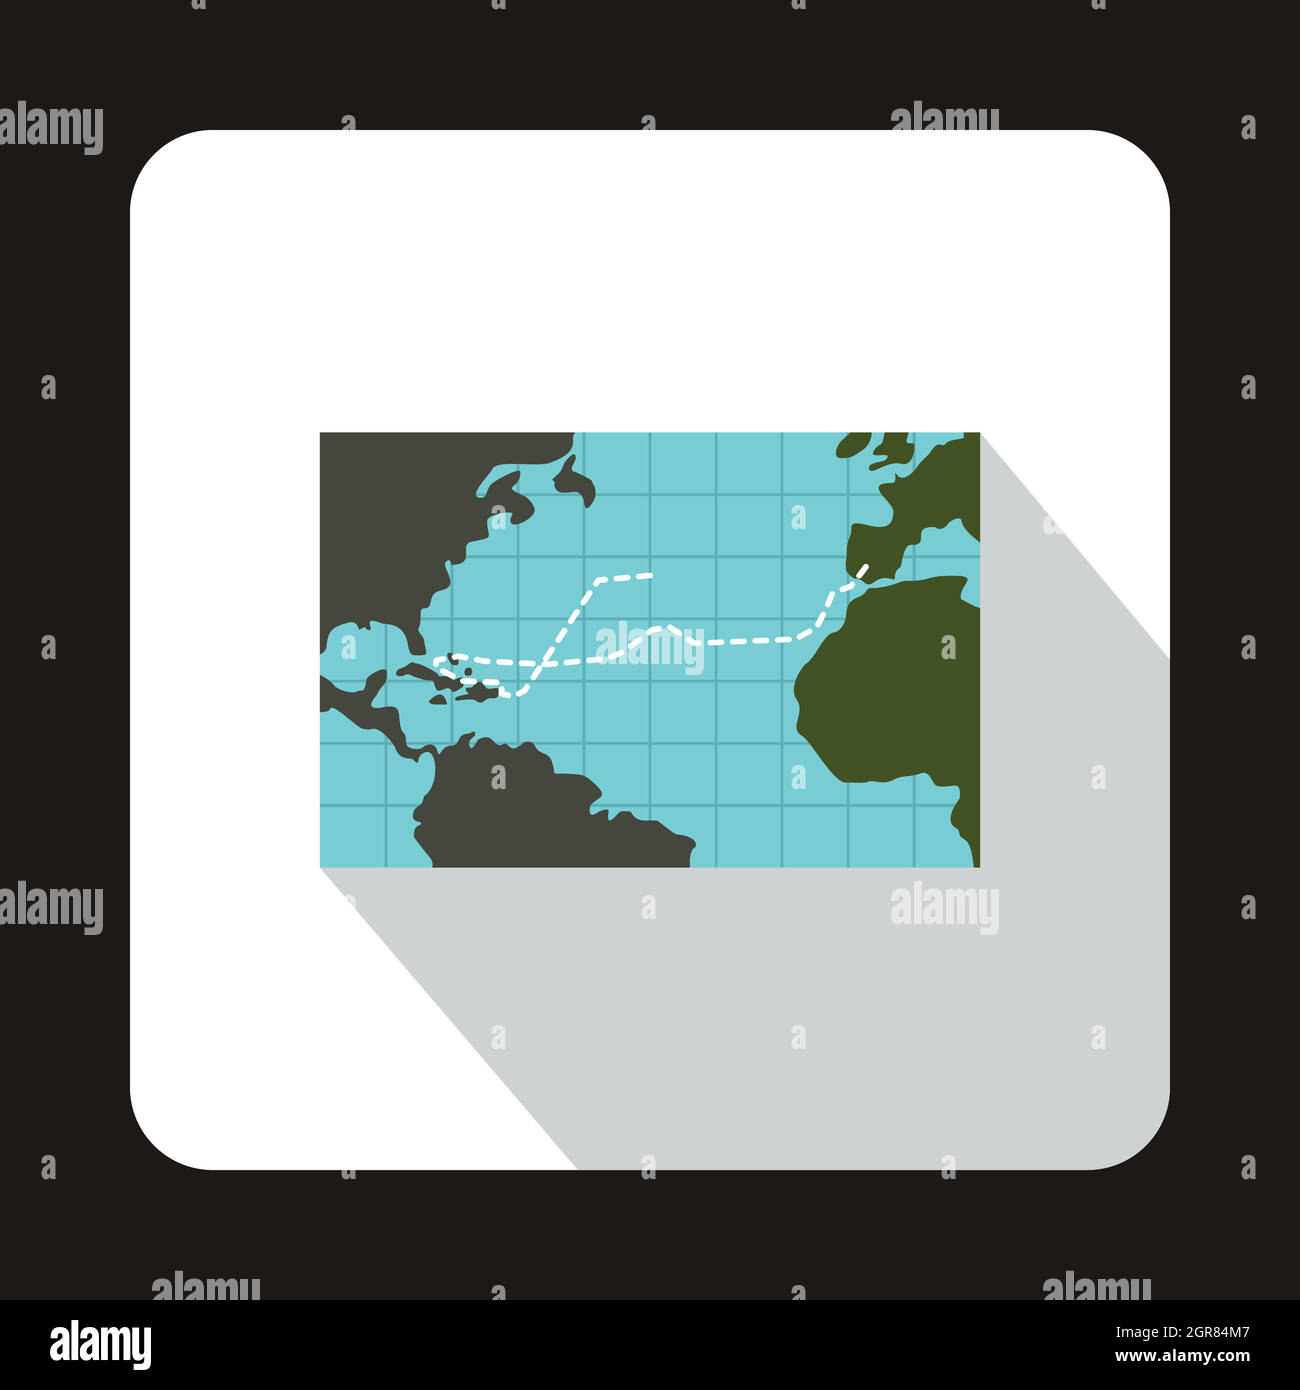 Christopher Columbus voyage map icon, flat style Stock Vector